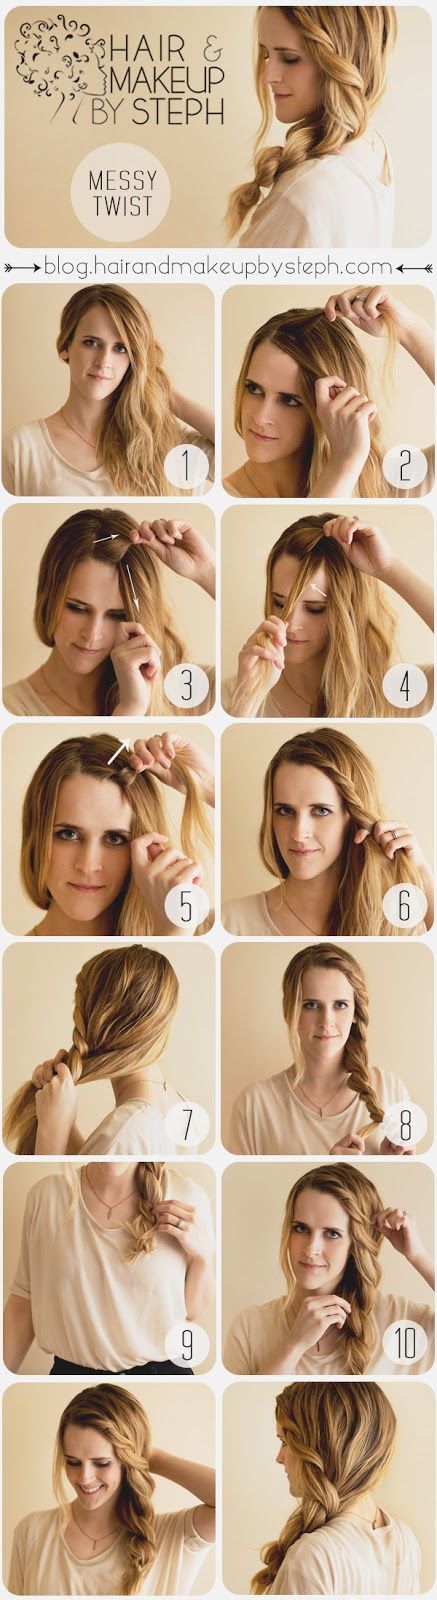 simple-and-fast-hairstyles-21_15 Simple and fast hairstyles